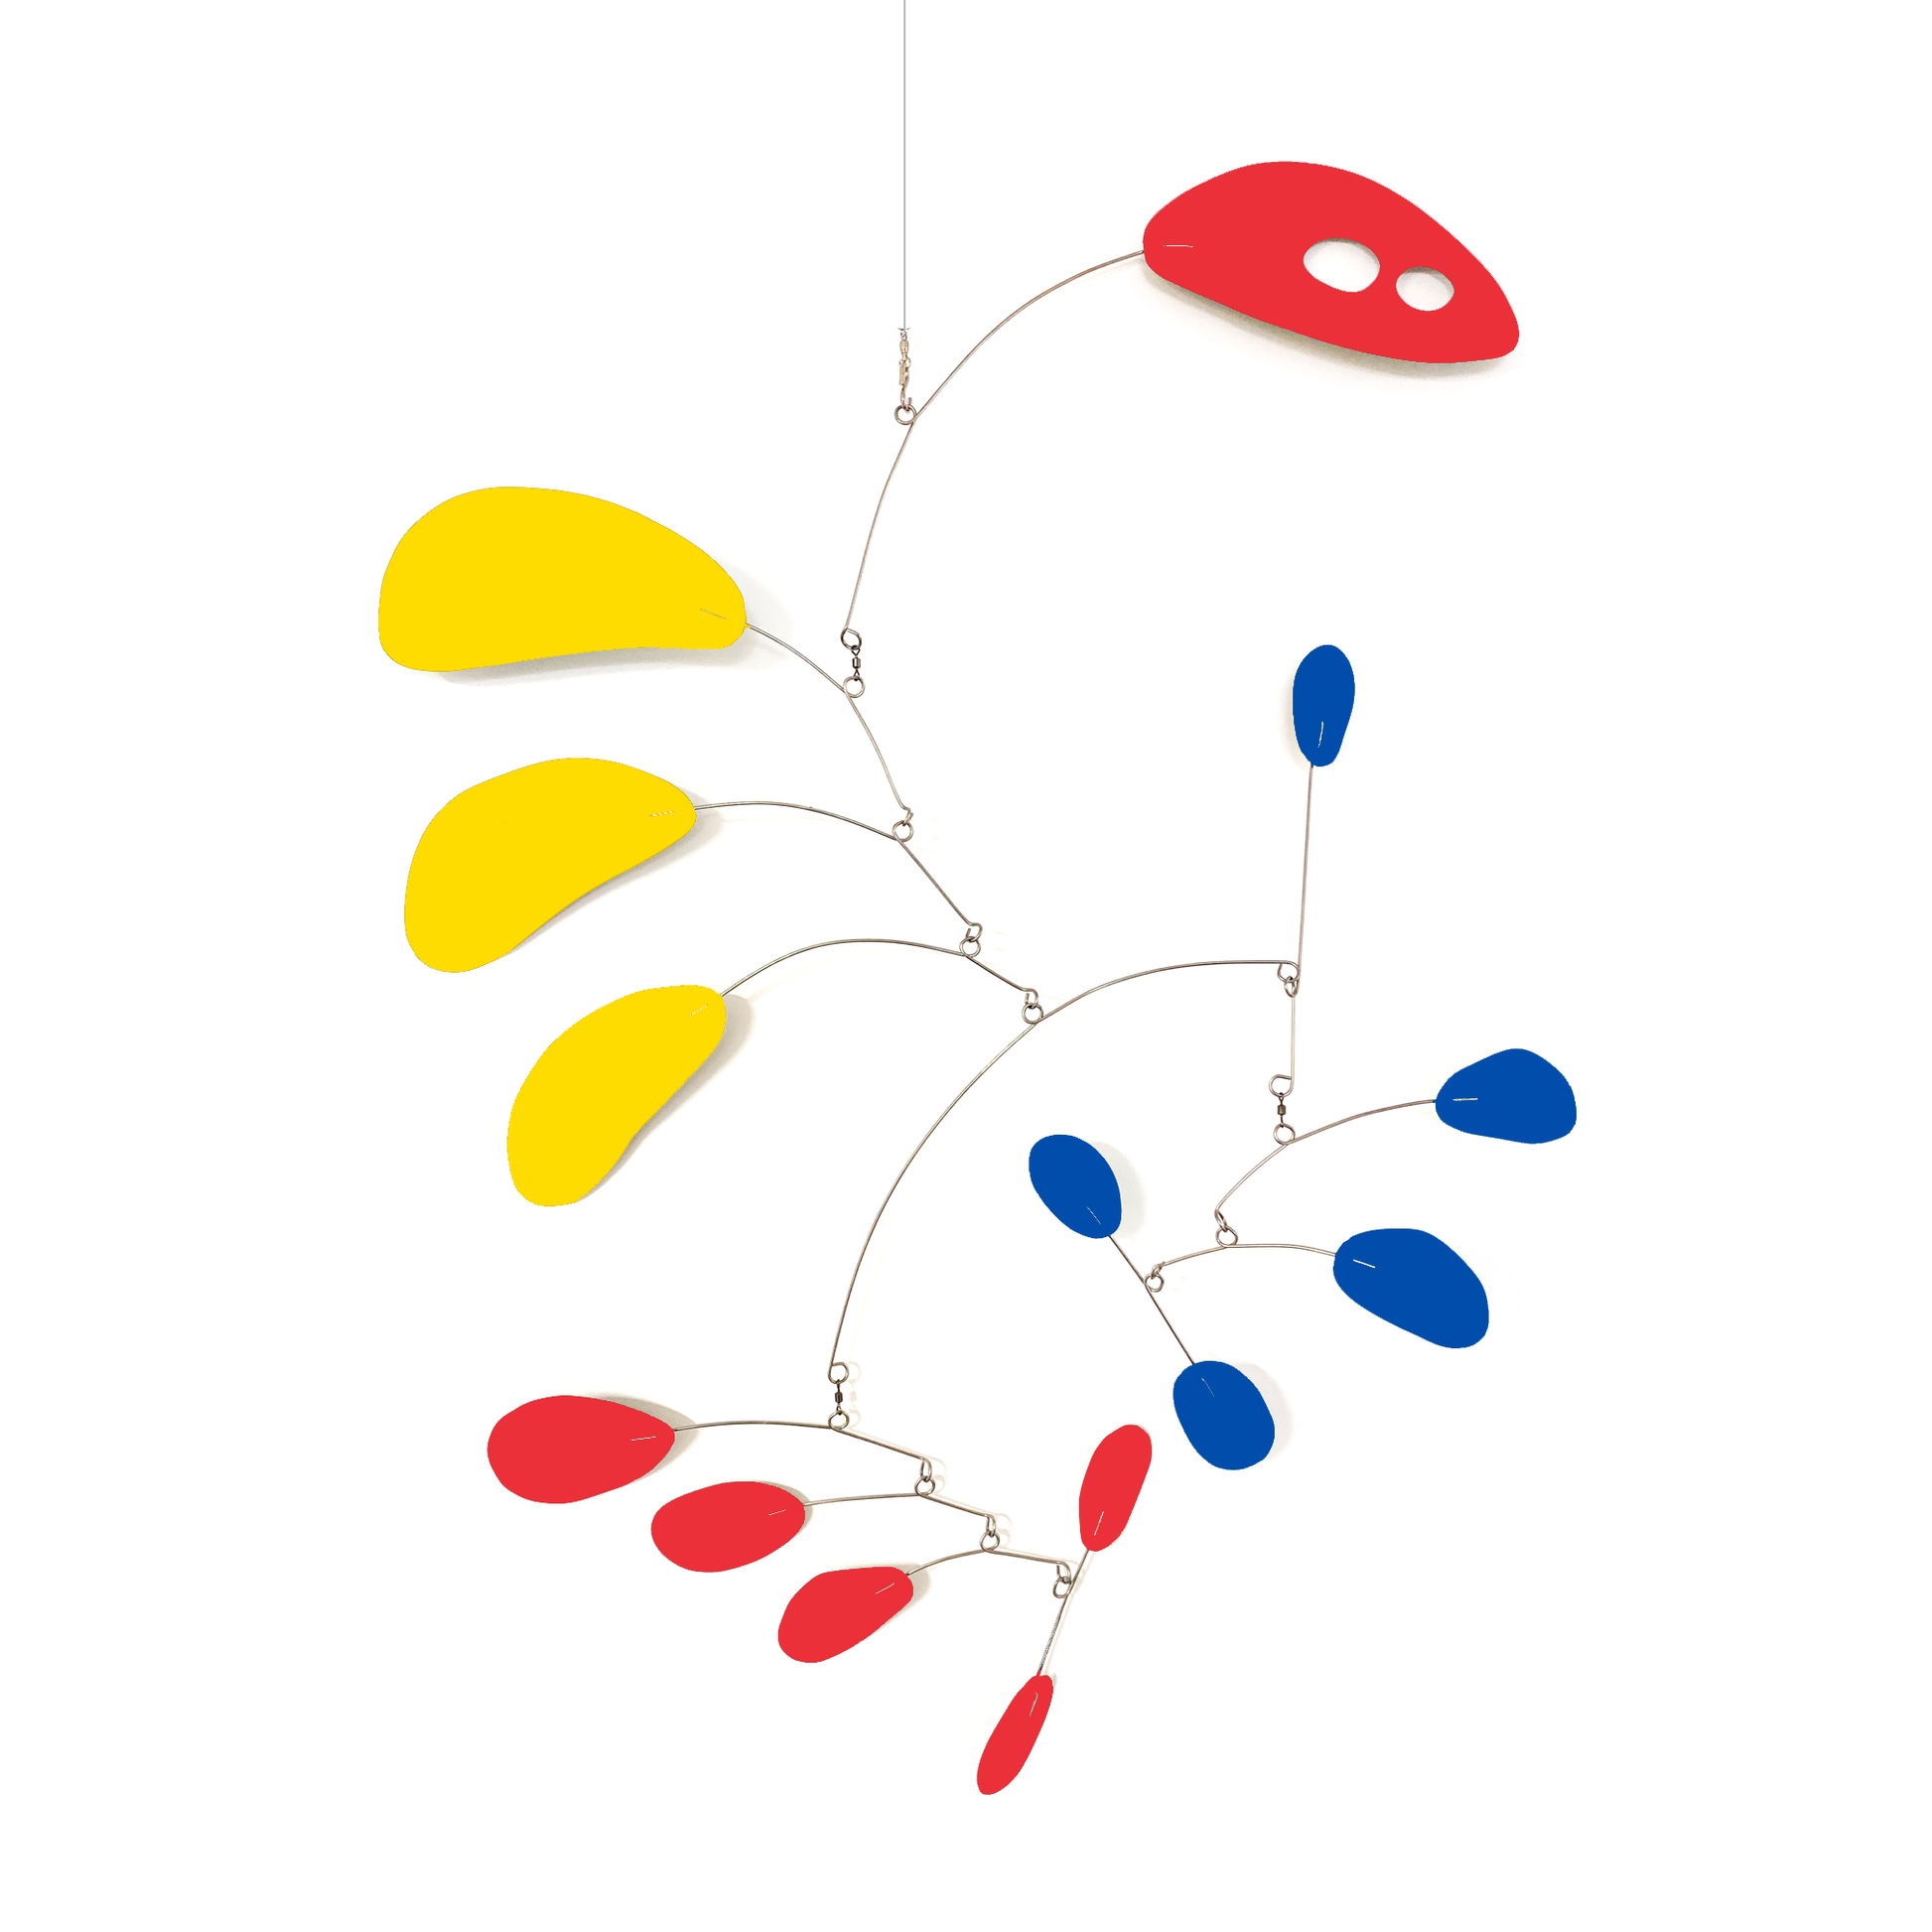 CoolCat mid century modern inspired hanging kinetic art mobile in modern colors of red, blue, and yellow by AtomicMobiles.com